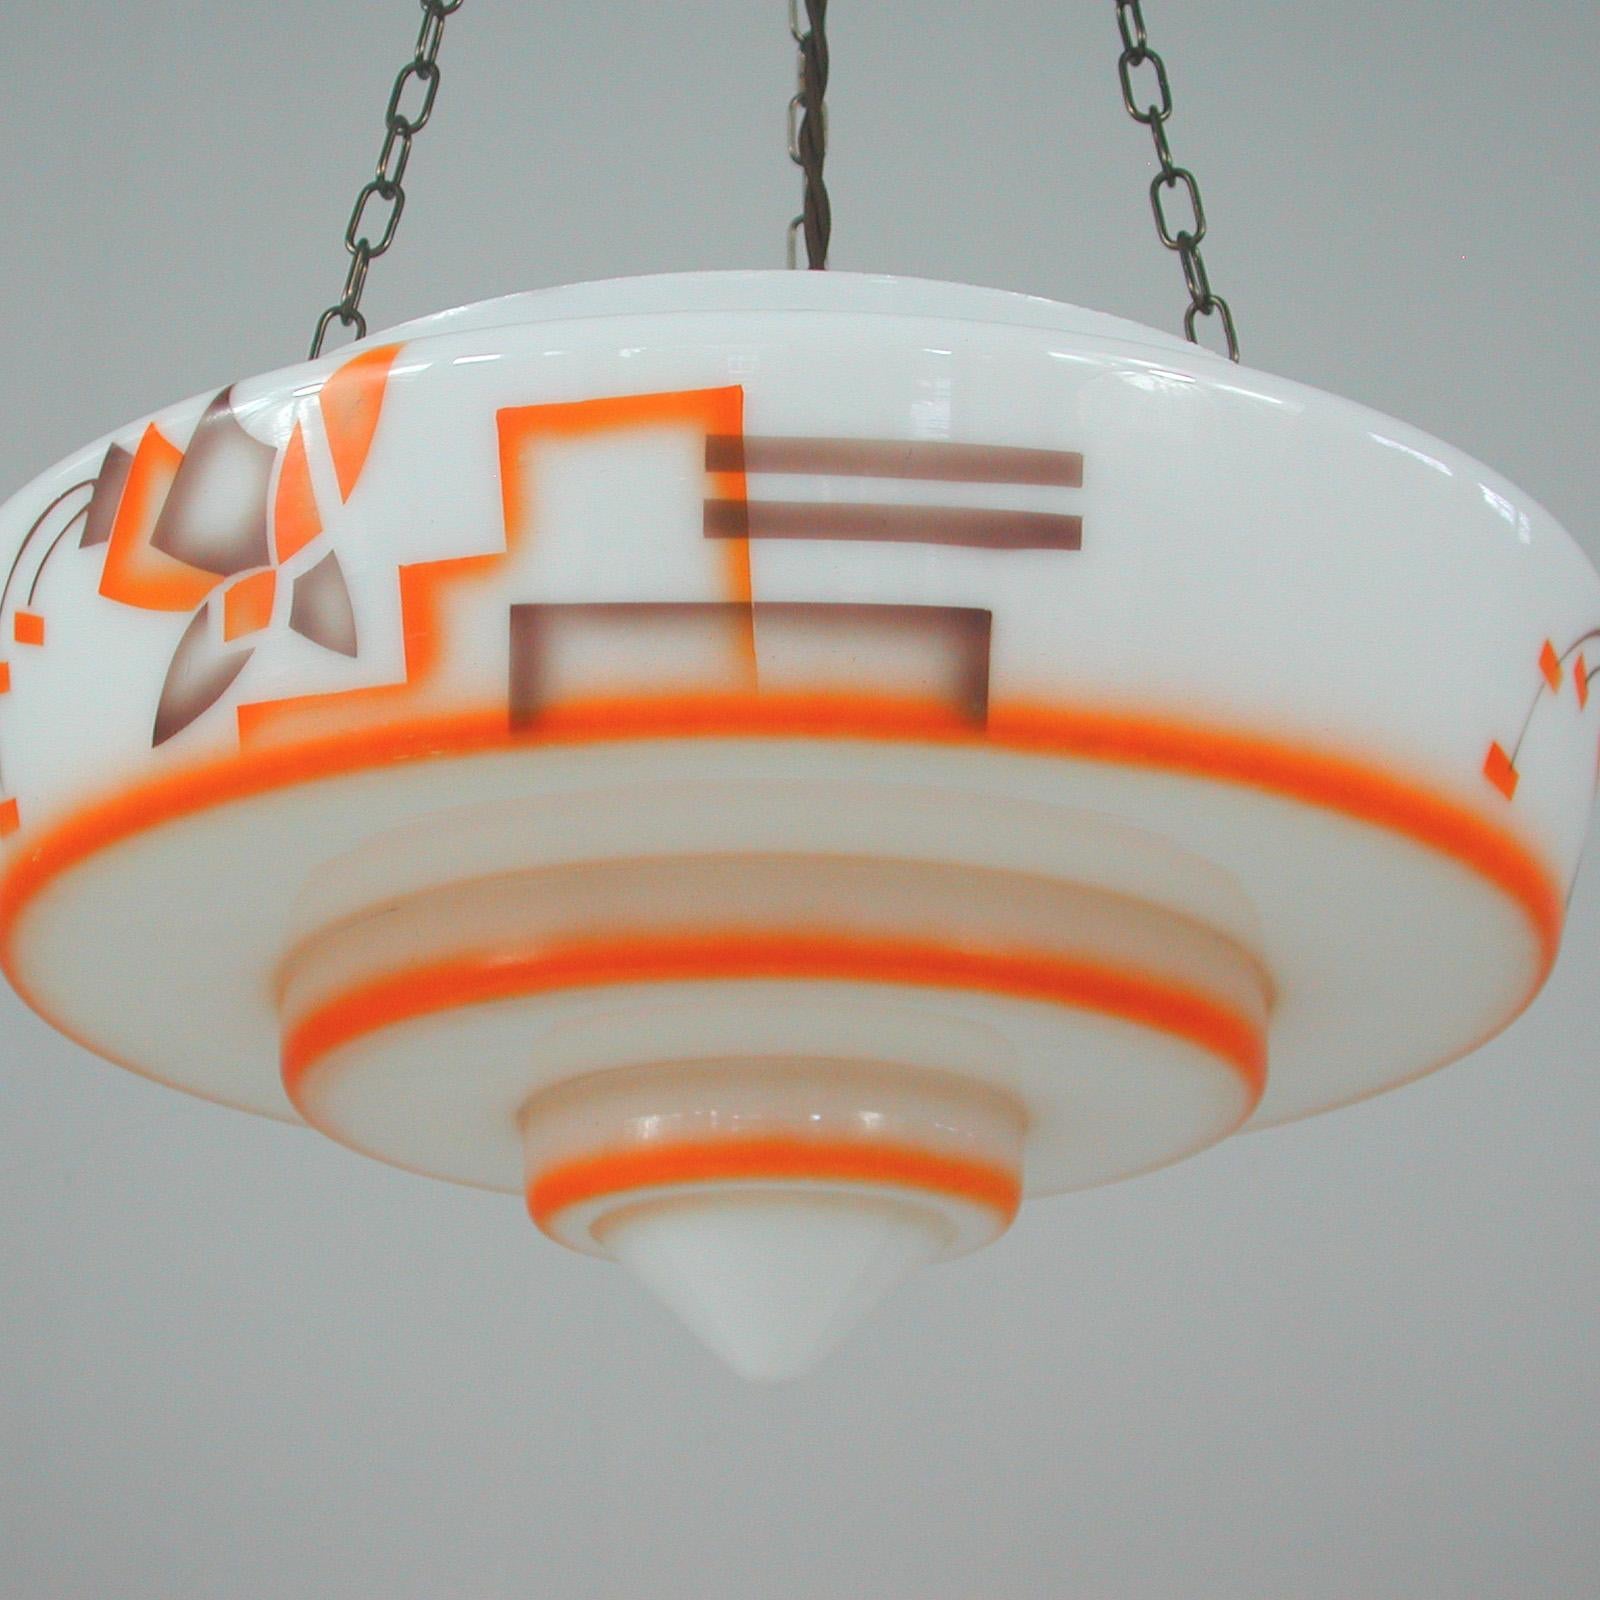 German Art Deco Suspension Light, Enameled Glass and Brass, 1930s For Sale 9